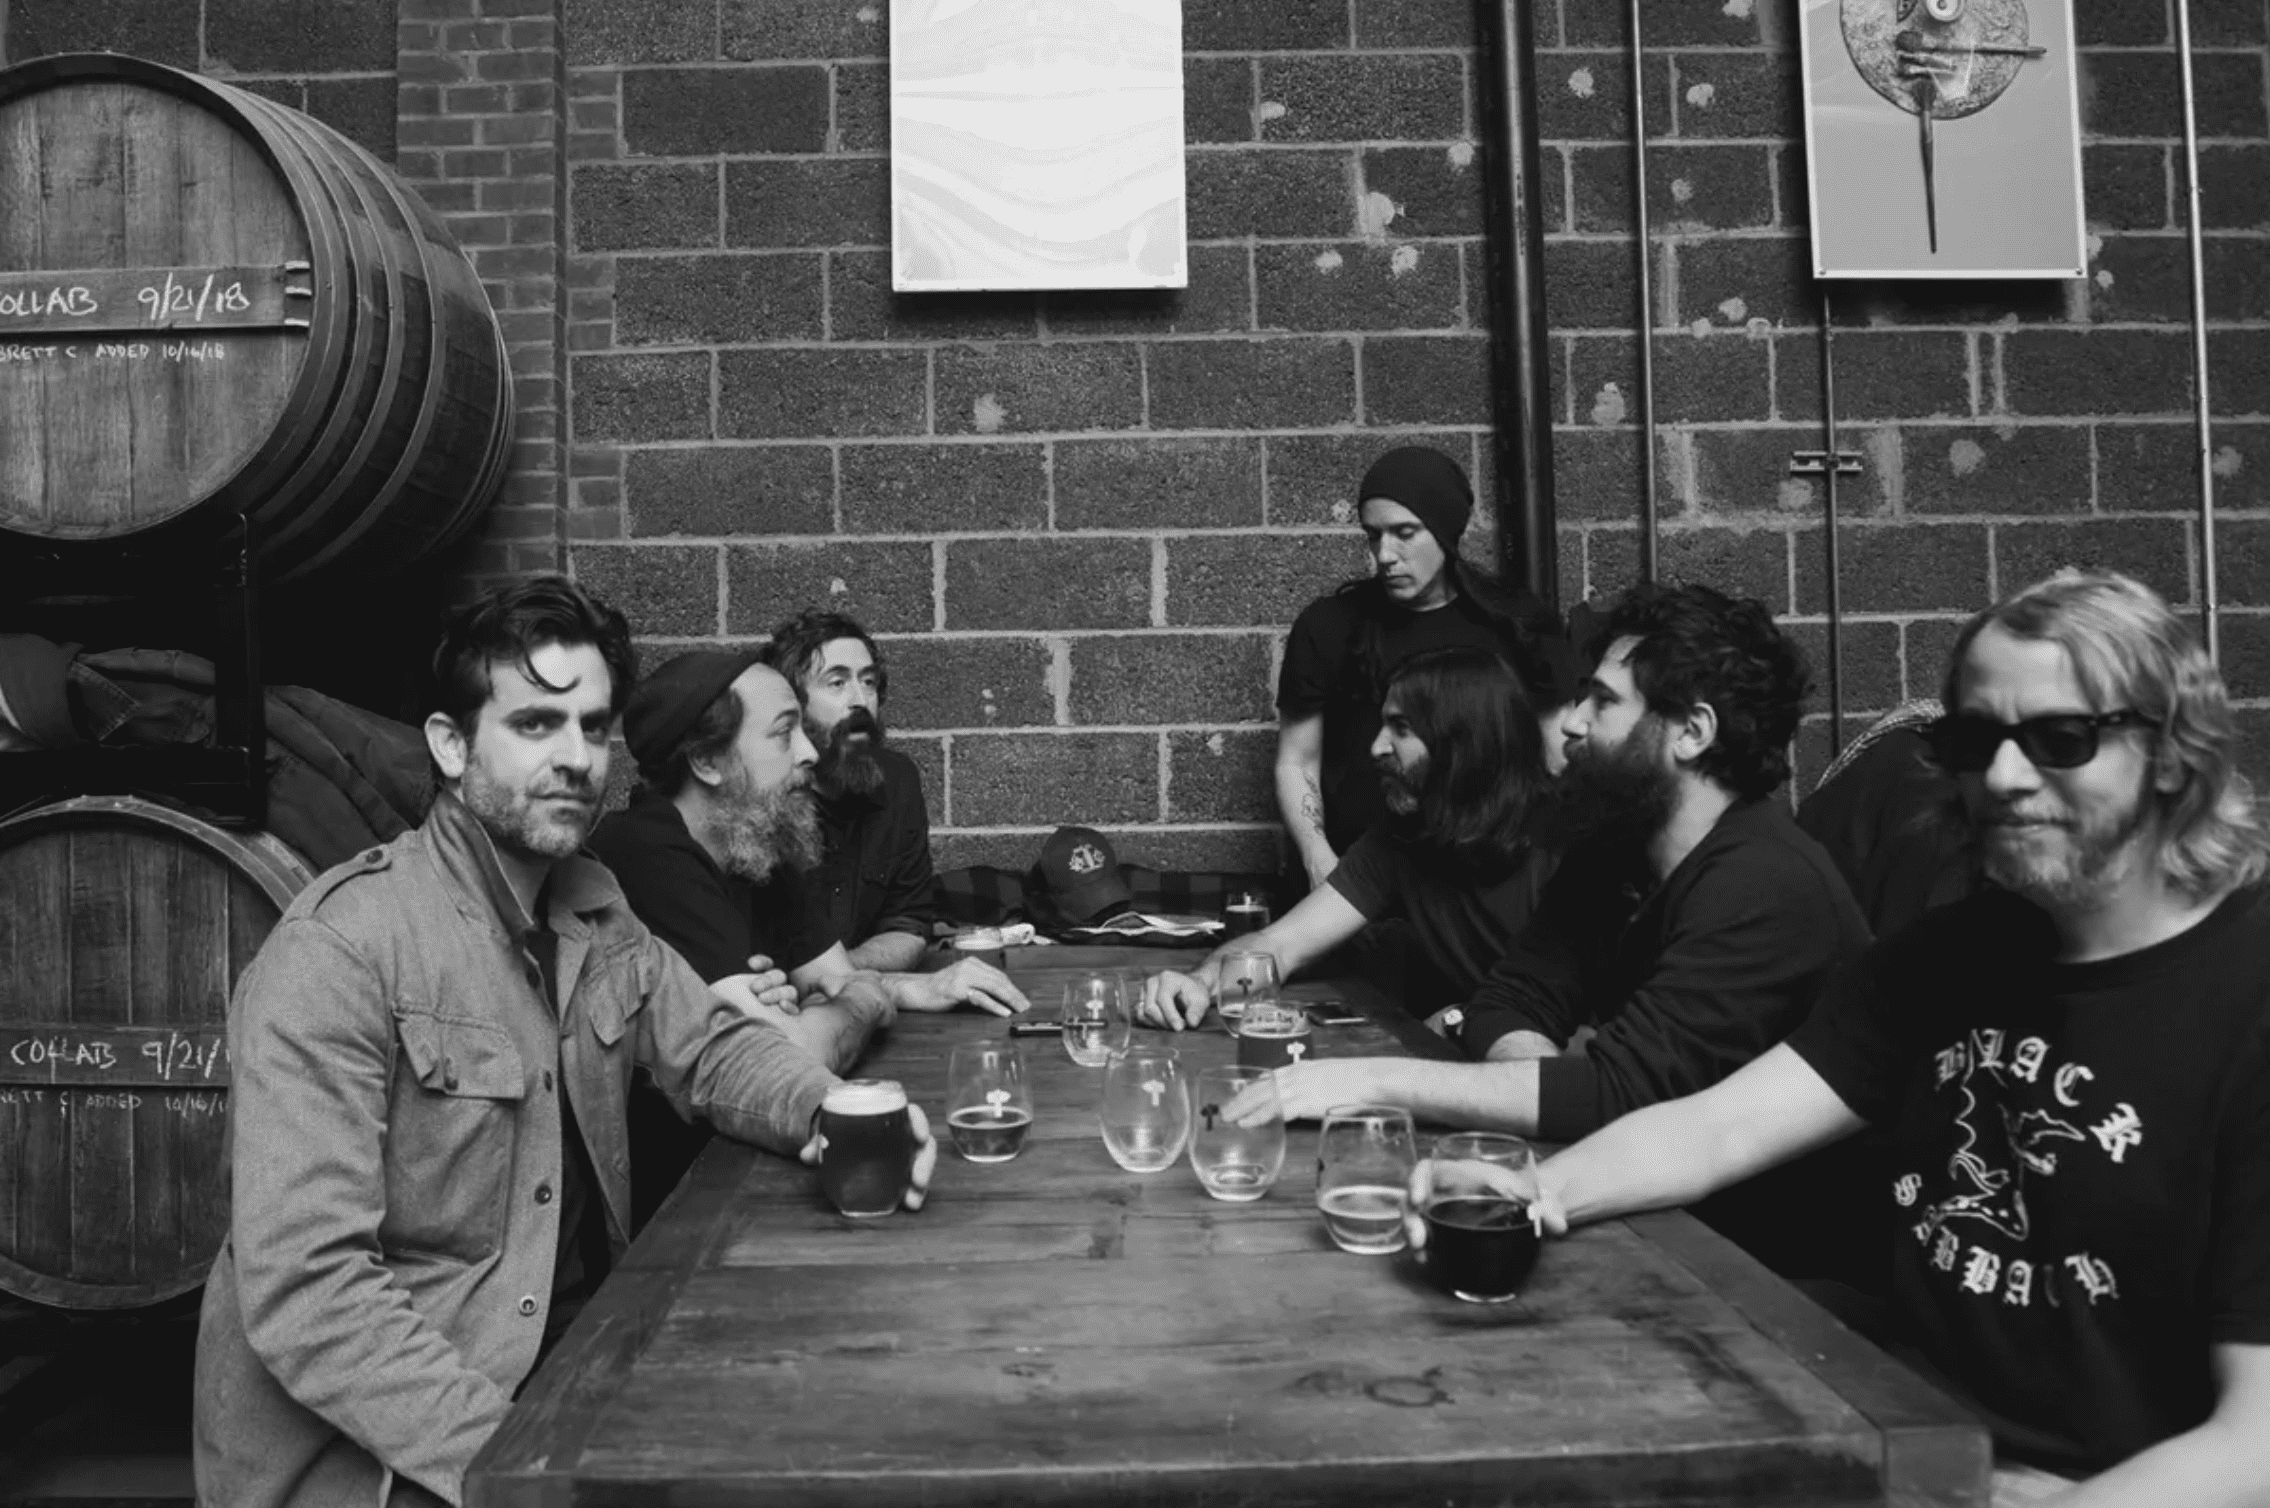 The Budos Band Prove They Are Not ‘Long in the Tooth’